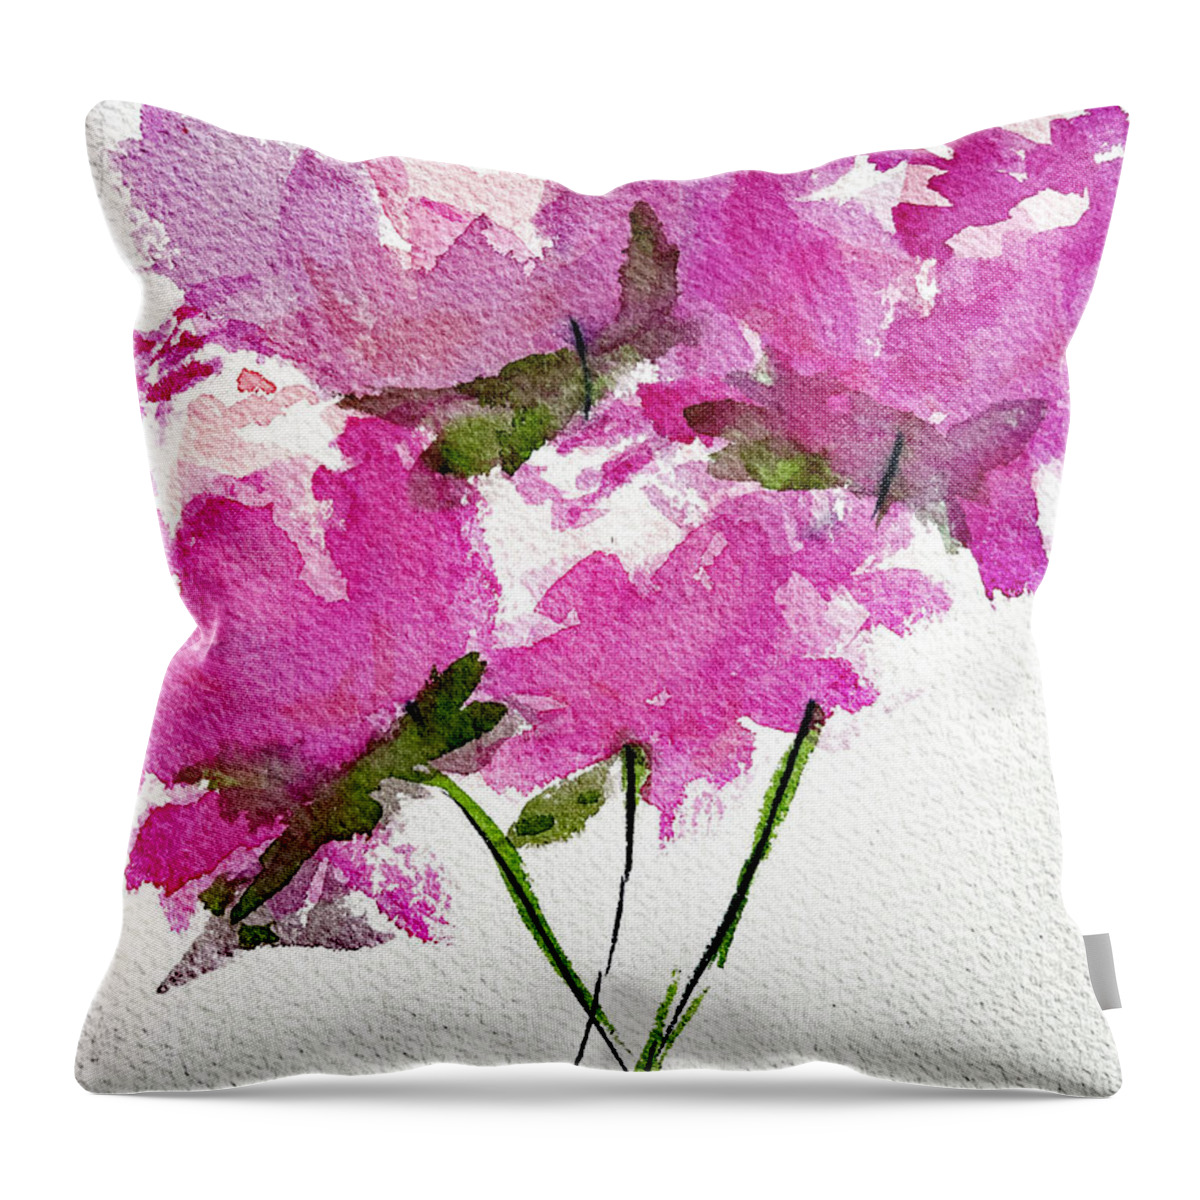 Peonies Throw Pillow featuring the painting Four Peonies Blooming by Roxy Rich